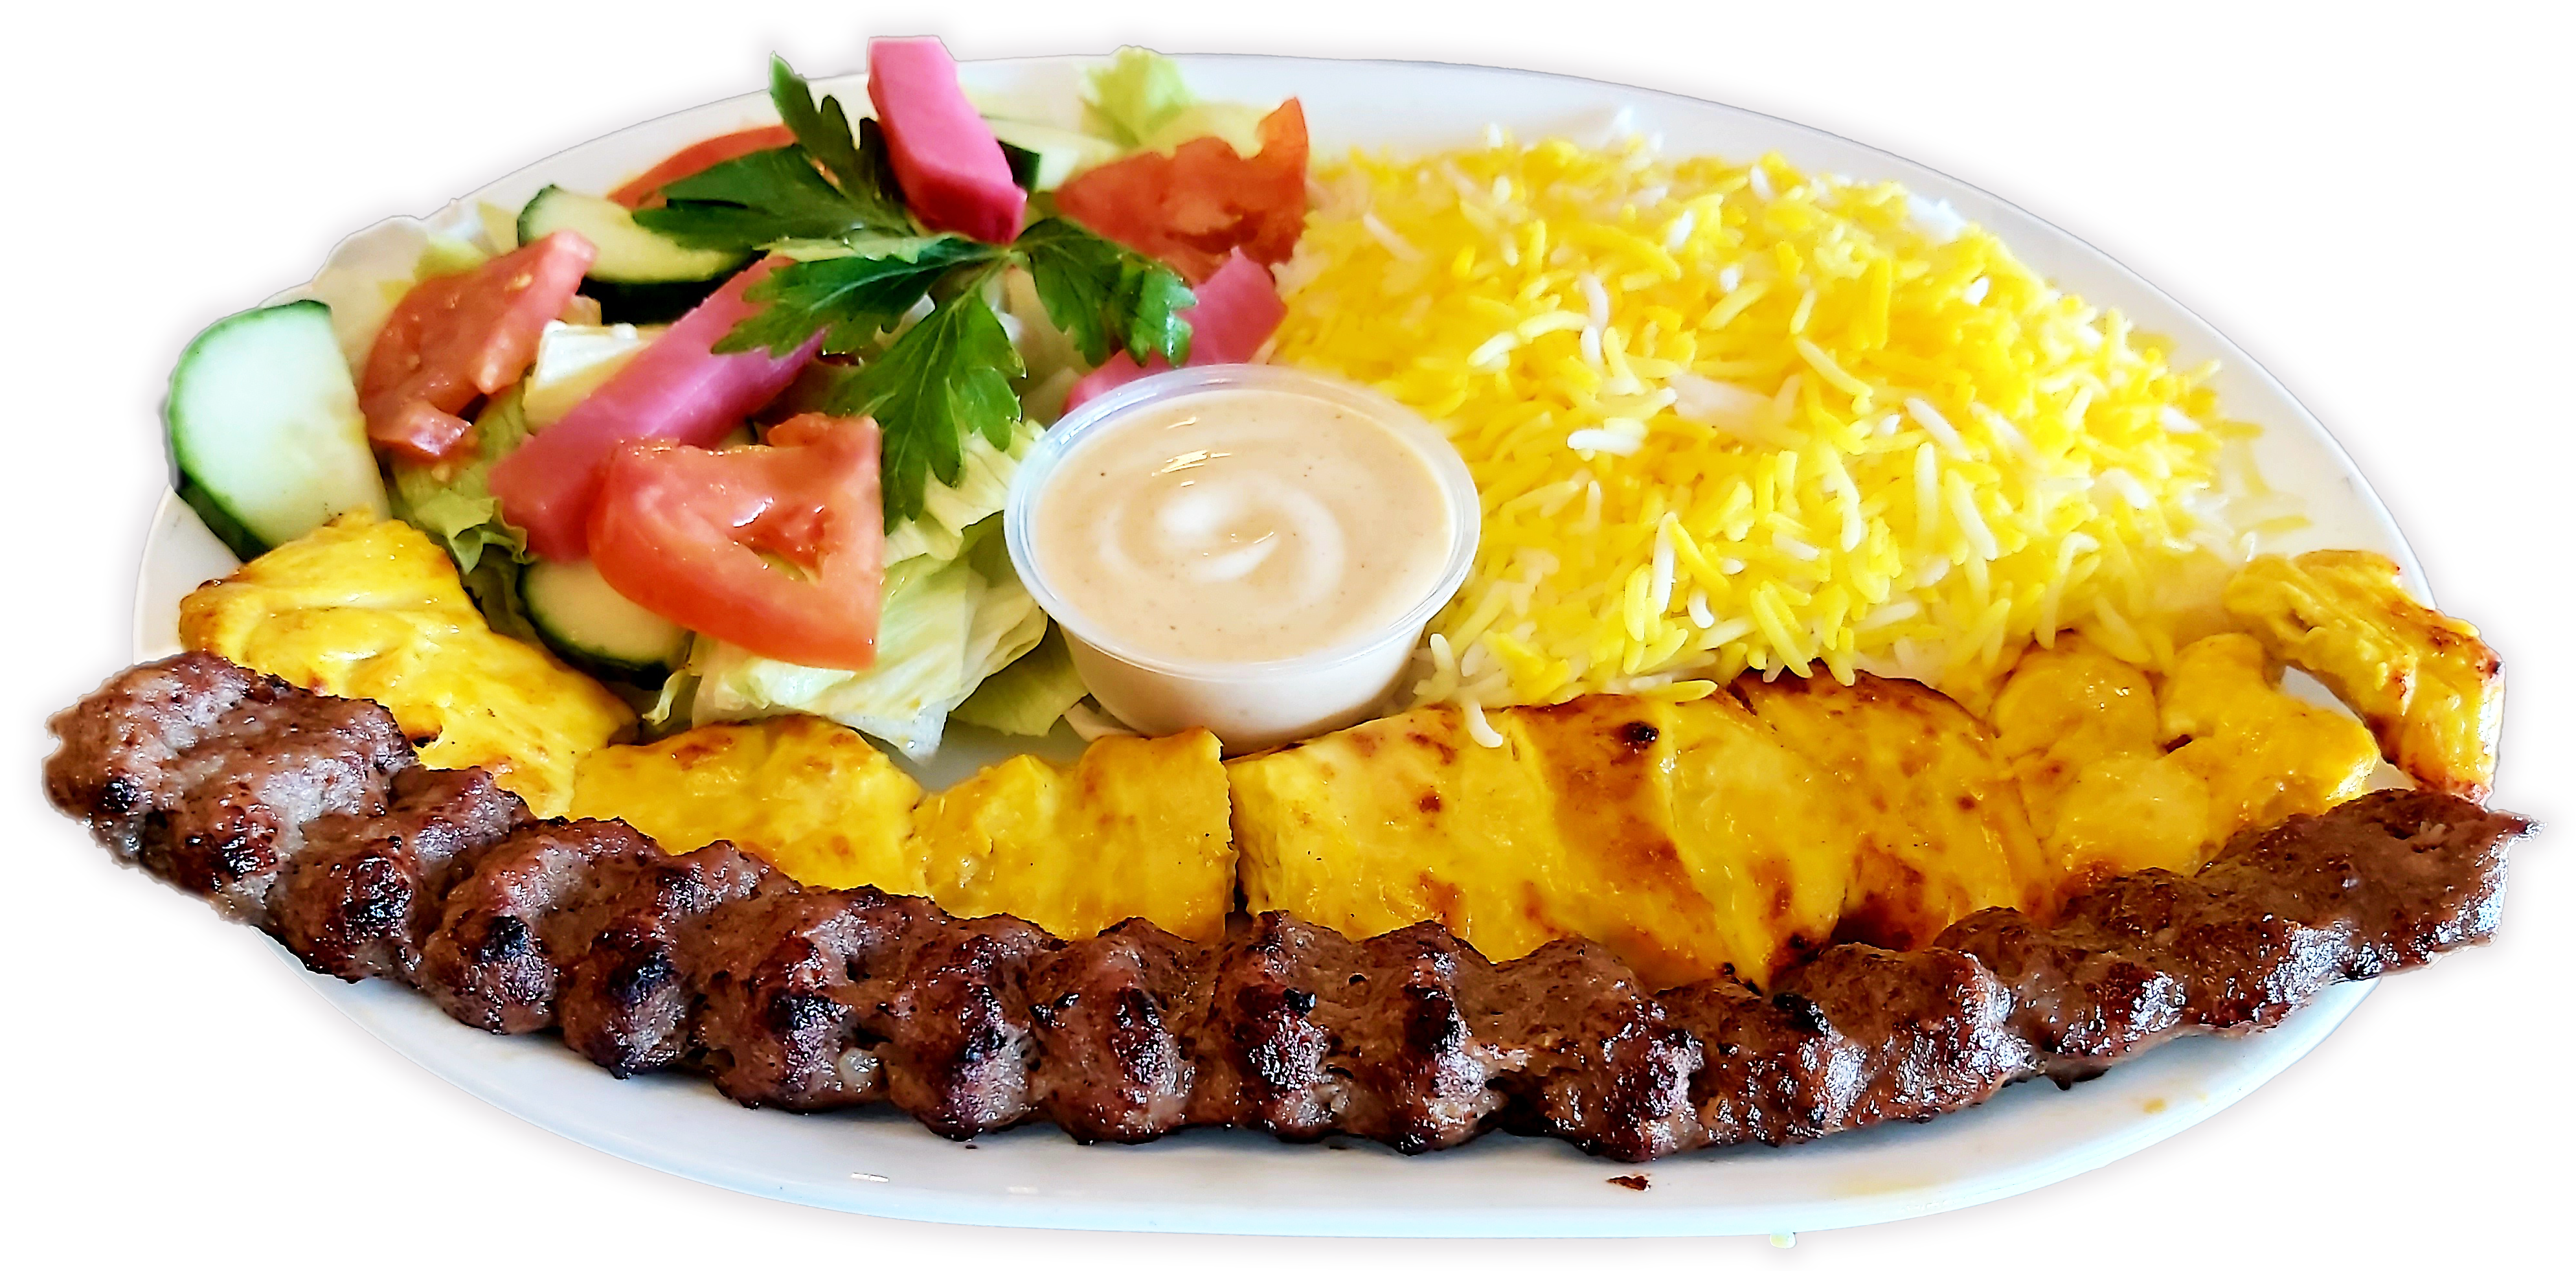 chicken breast kebab with rice, salad, and grilled tomatoes